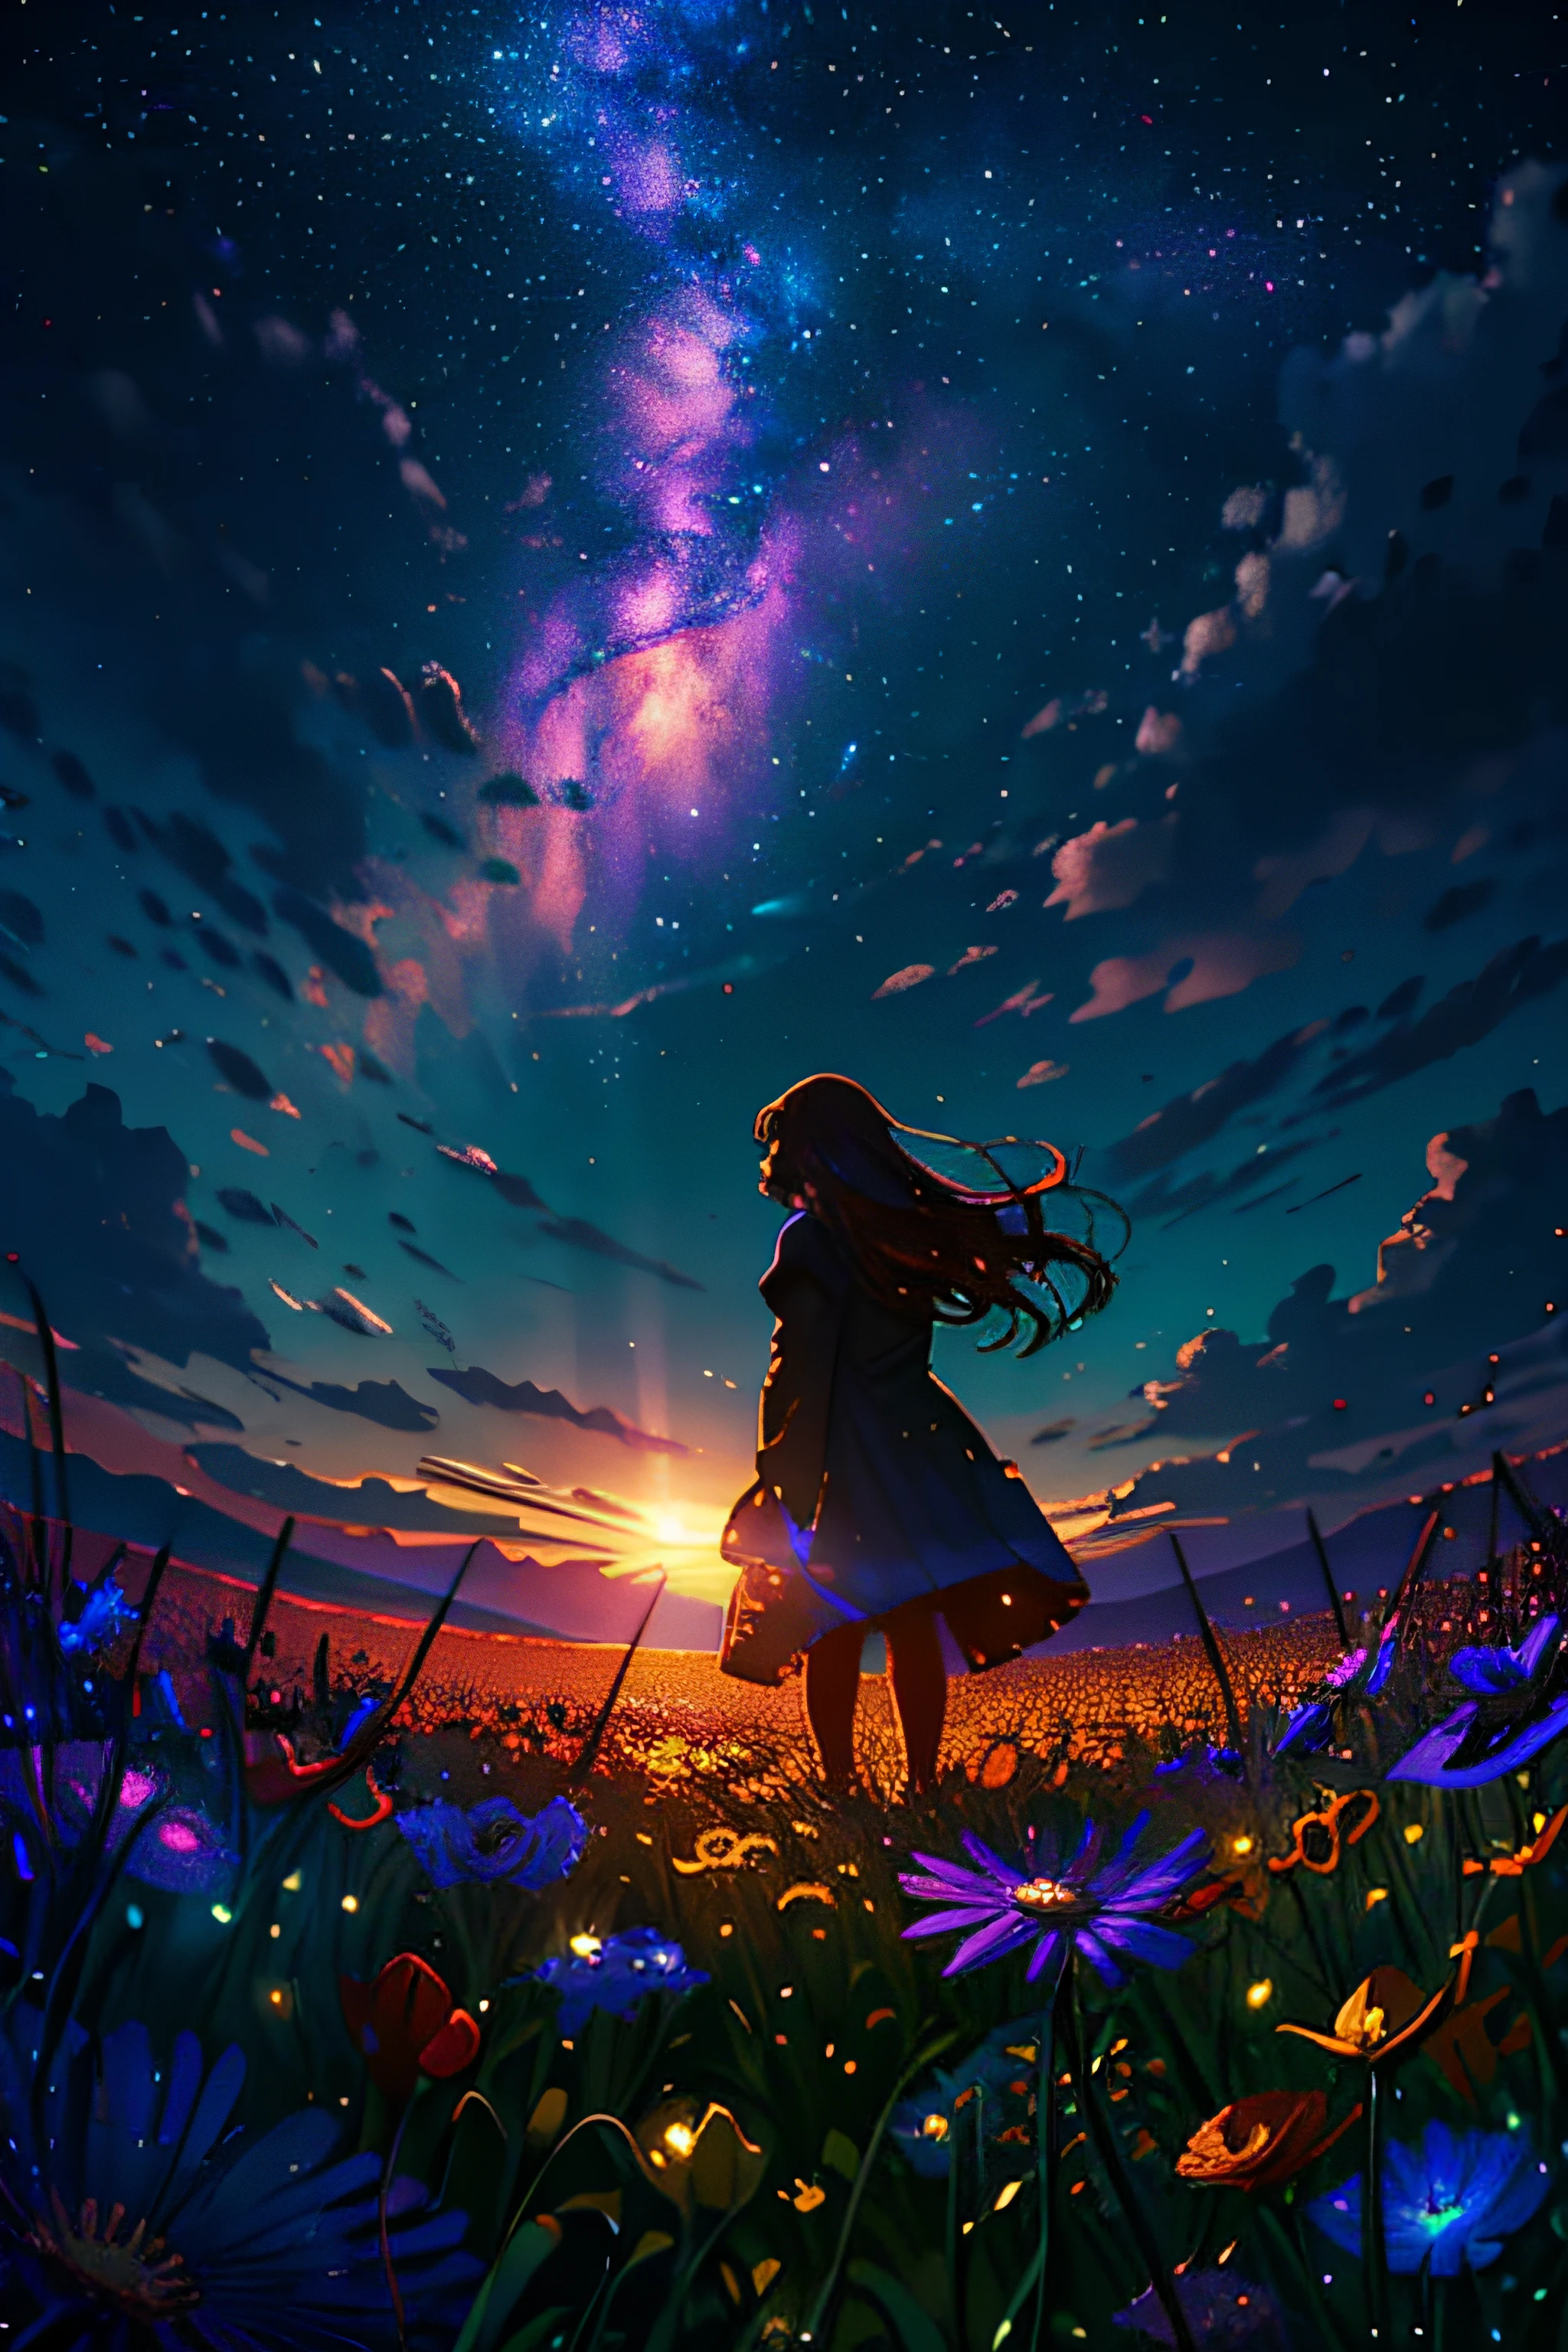 A wide landscape photo, (viewed from below, the sky is above, and the open field is below), ((a girl standing on a flower field looking up)), long hair, long skirt, (full moon: 1.2), (meteor: 0.9), (nebula: 1.3), distant mountains , Trees,Crafting Art, (Warm Light: 1.2), (Firefly: 1.2), Lights, Lots of Purple and Orange, Intricate Details, Volumetric Lighting BREAK (Masterpiece: 1.2), (Best Quality), 4k, Ultra Detailed, (Dynamic Composition: 1.4), Rich in Detail and Color, (Rainbow Color: 1.2), (Glow, Atmospheric Lighting), Dreamy, Magical, (Solo: 1.2)